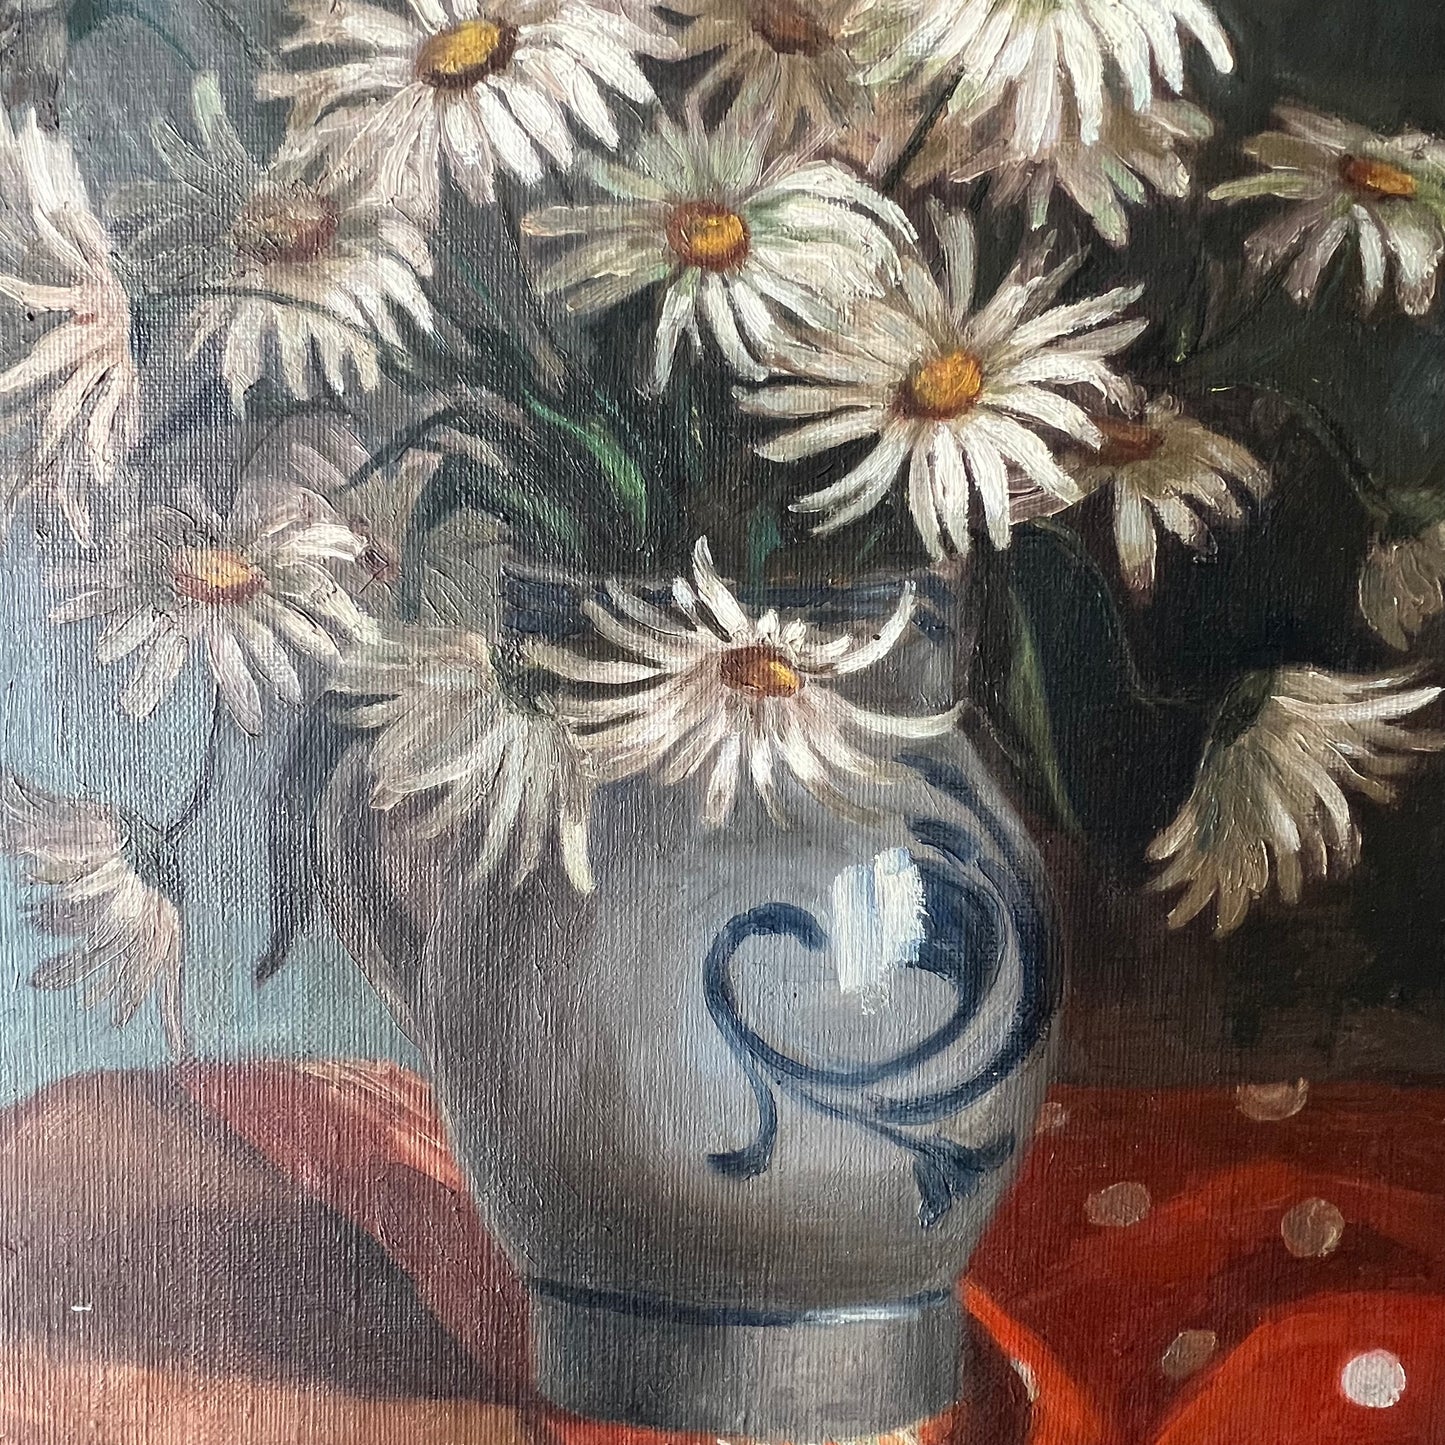 Vintage Oil Painting Still Life Daisies in Pottery Jug c1920s